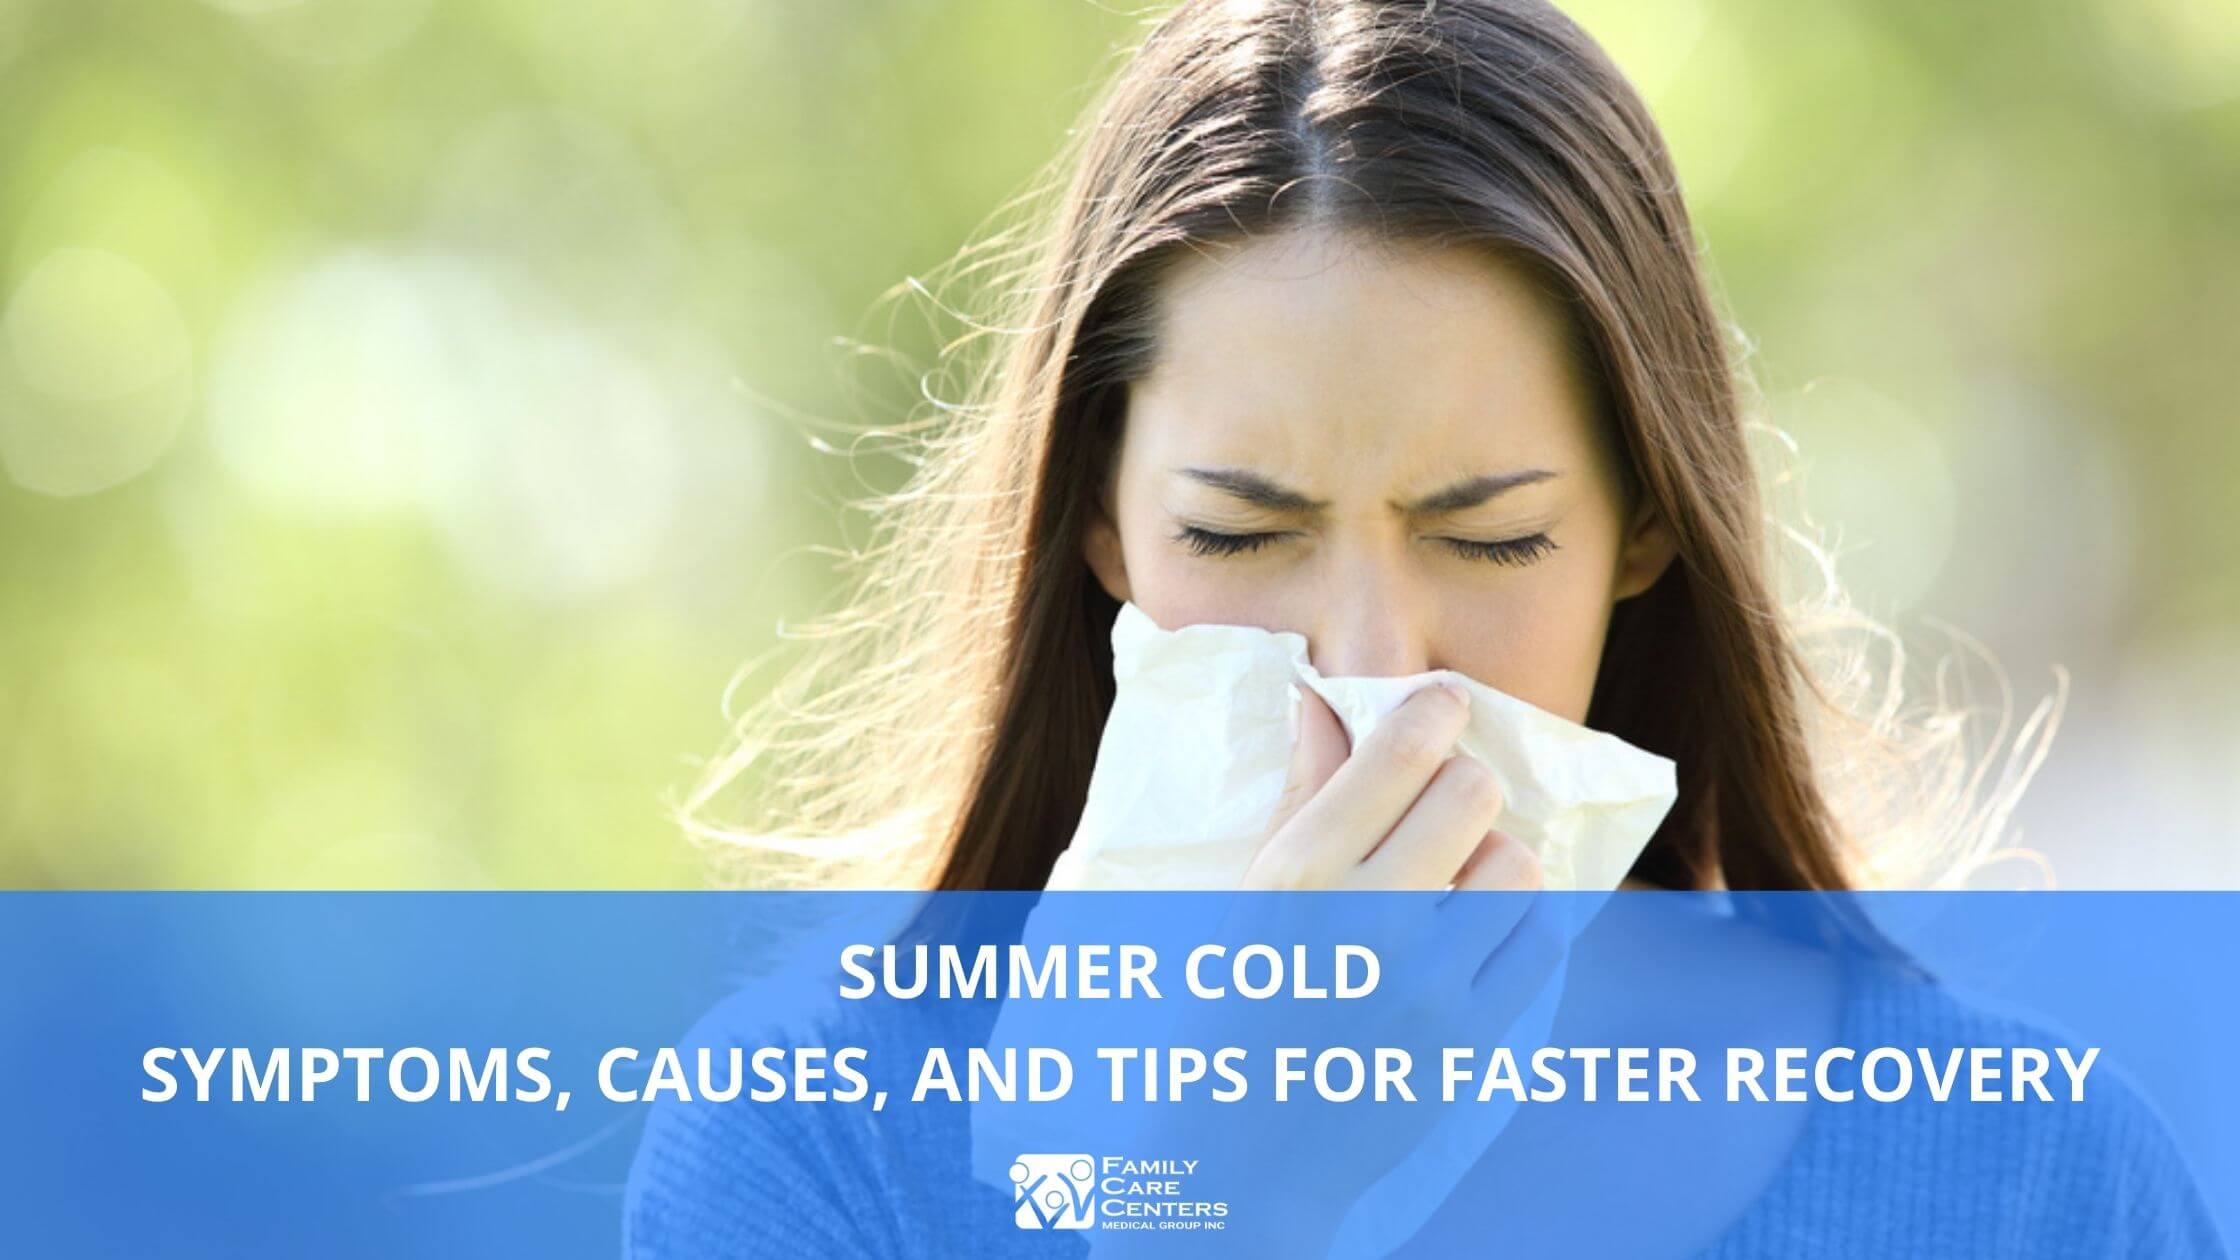 Summer Cold – Symptoms, Causes, and Tips for Faster Recovery